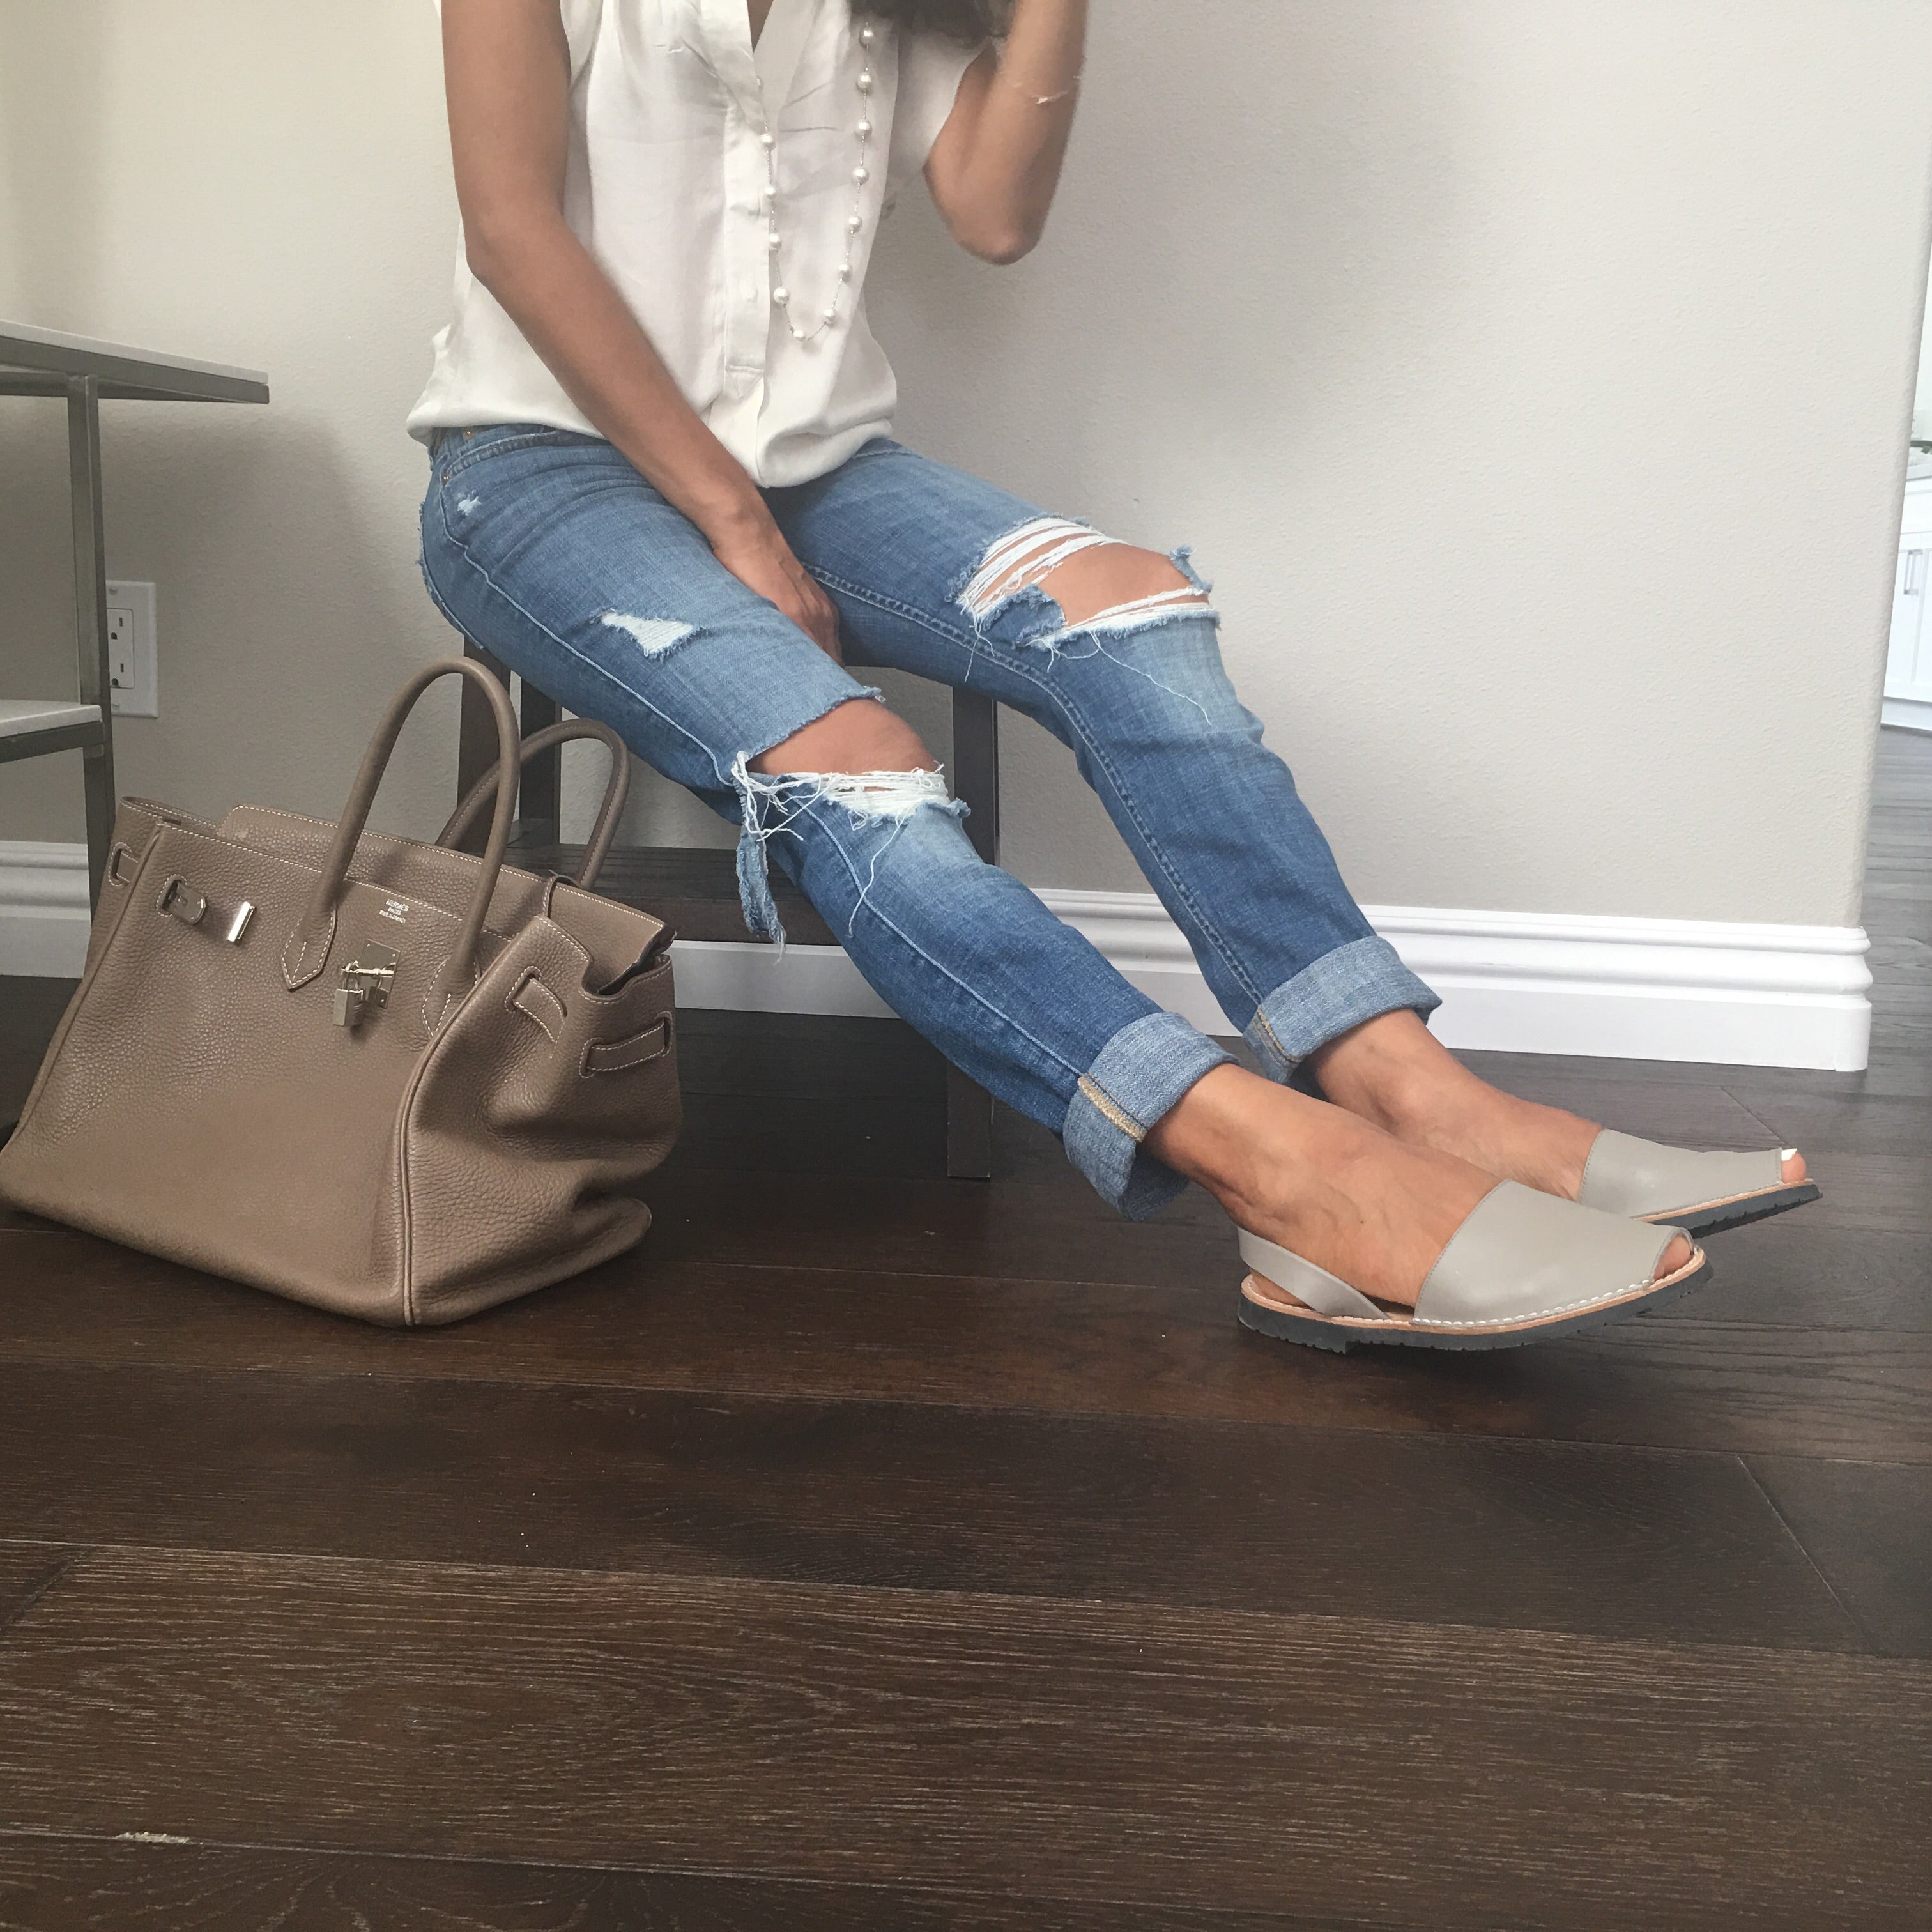 Classic taupe sandals with distressed jeans - Instagram